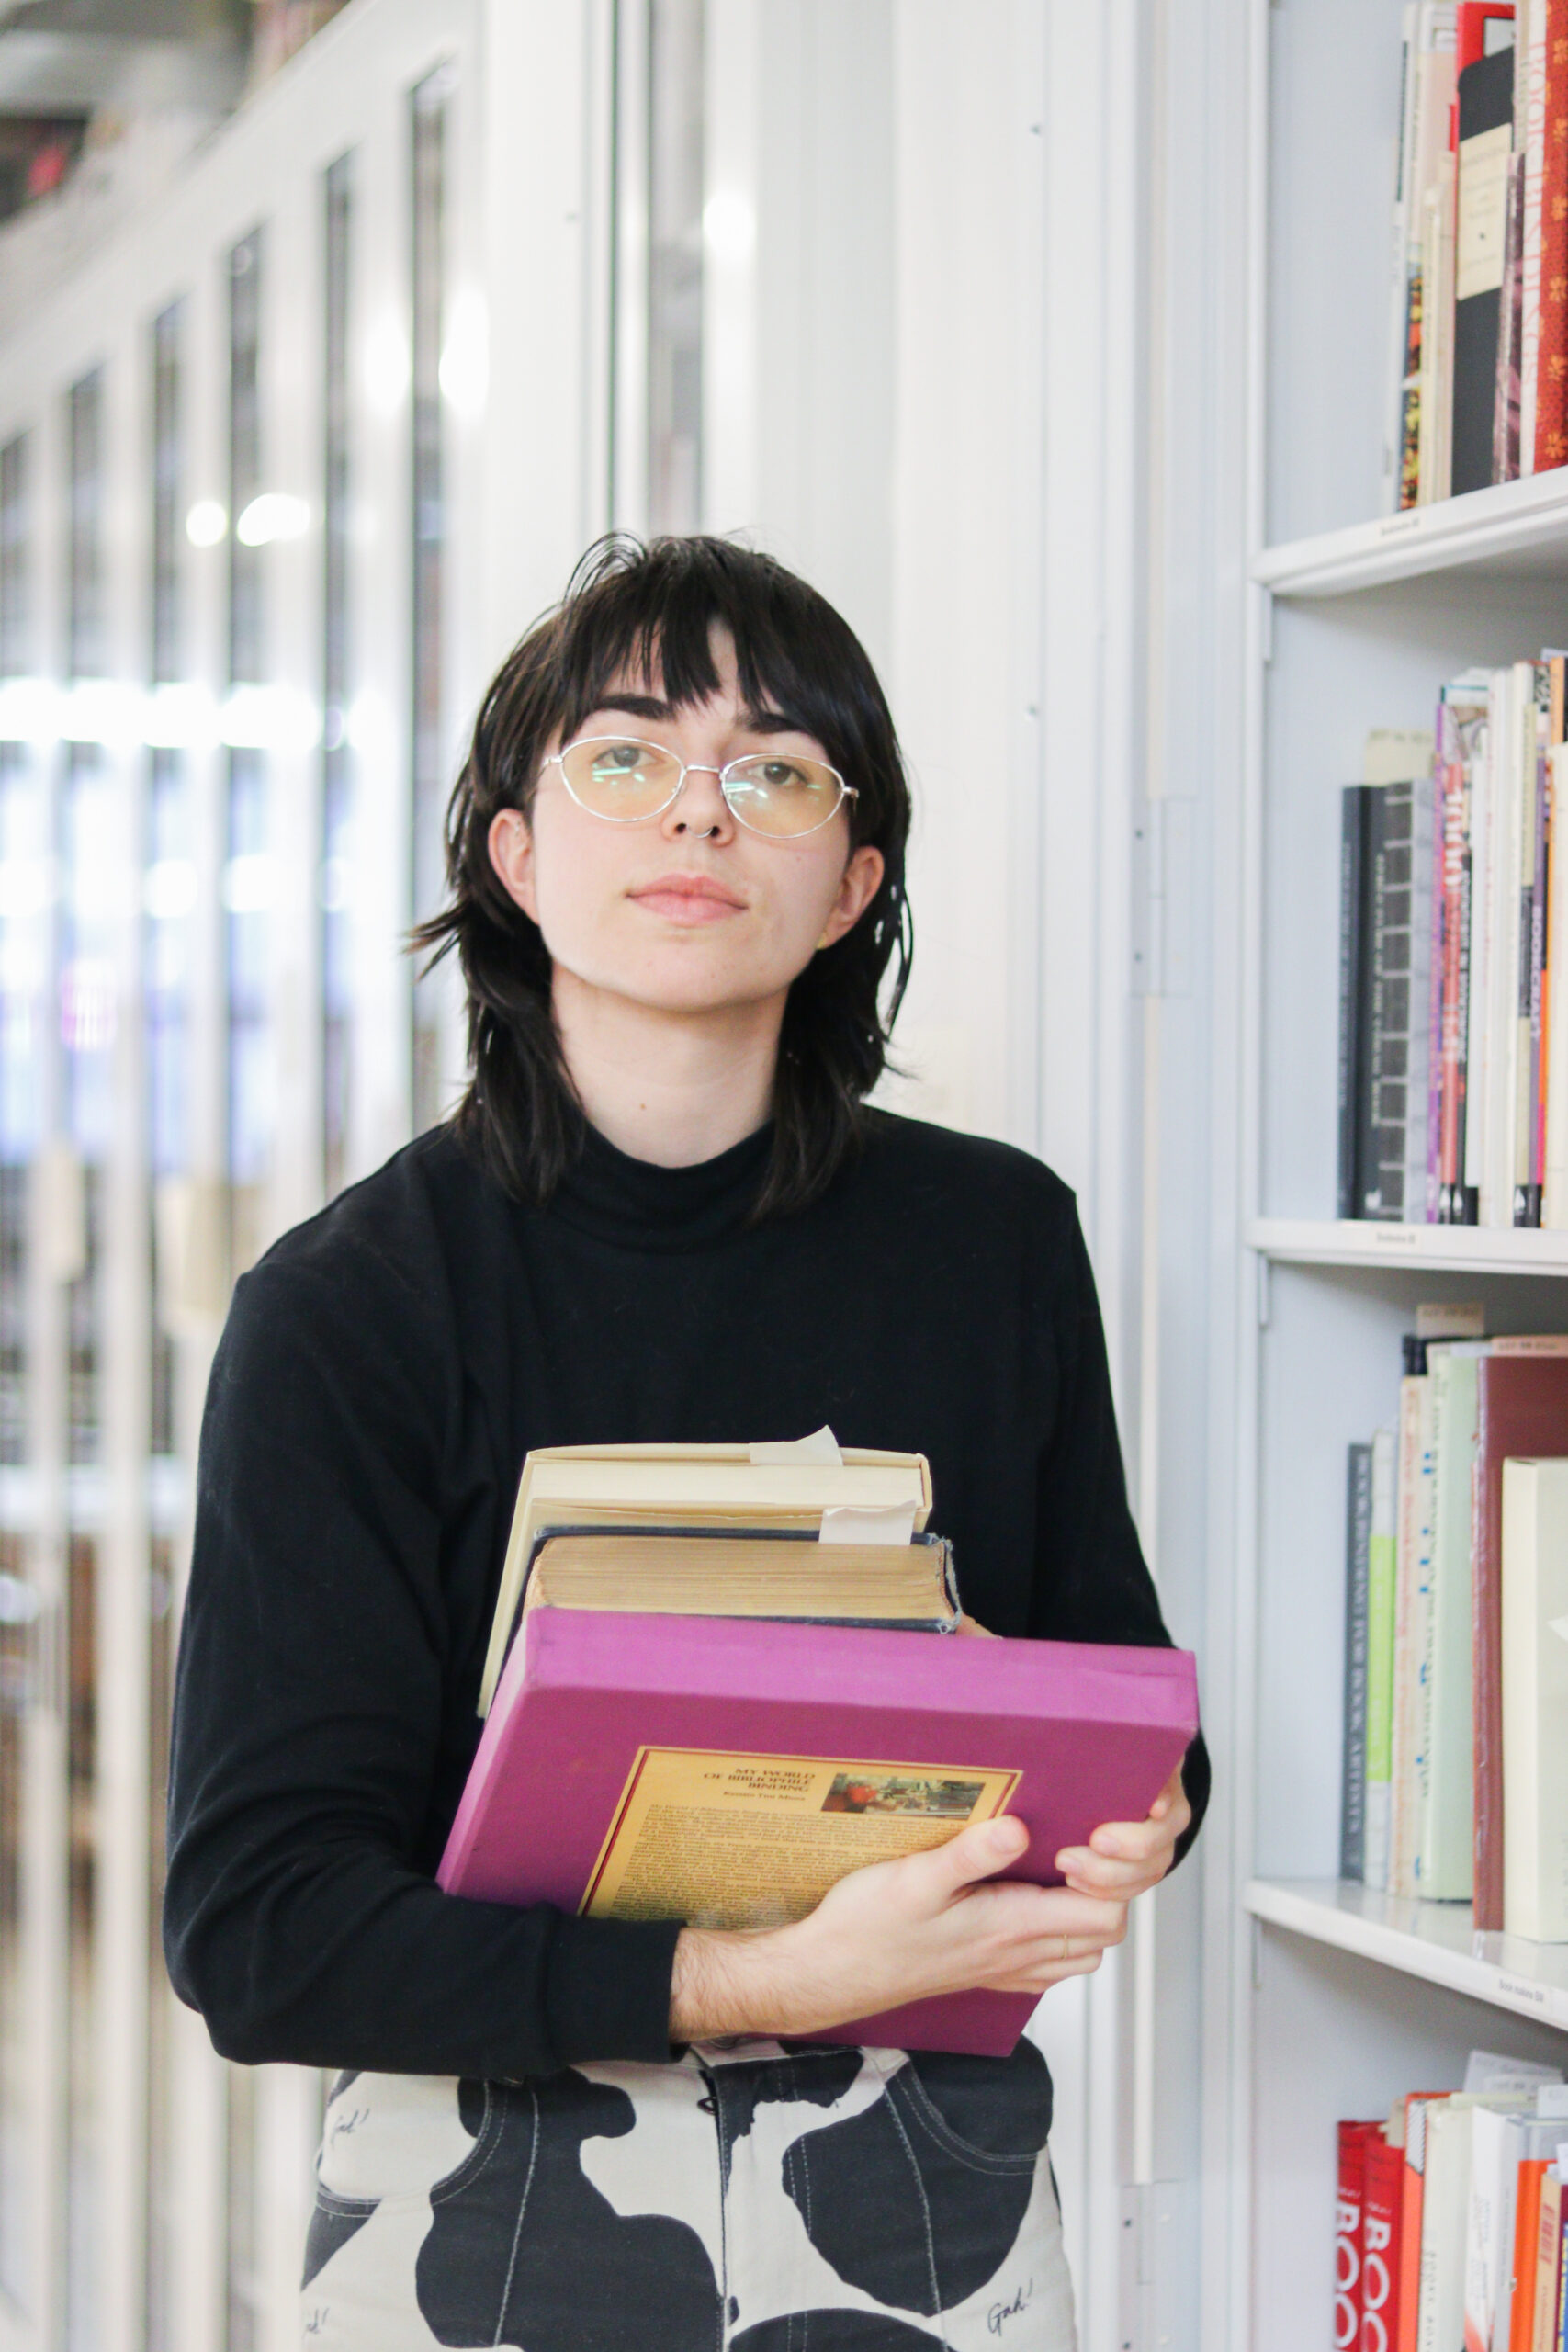 Gillian, a white person with shoulder-length brown hair and bangs, wearing a black turtleneck and cow print pants, stands in front of the CBA bookcases holding a stack of books and looking at the camera with a neutral expression.